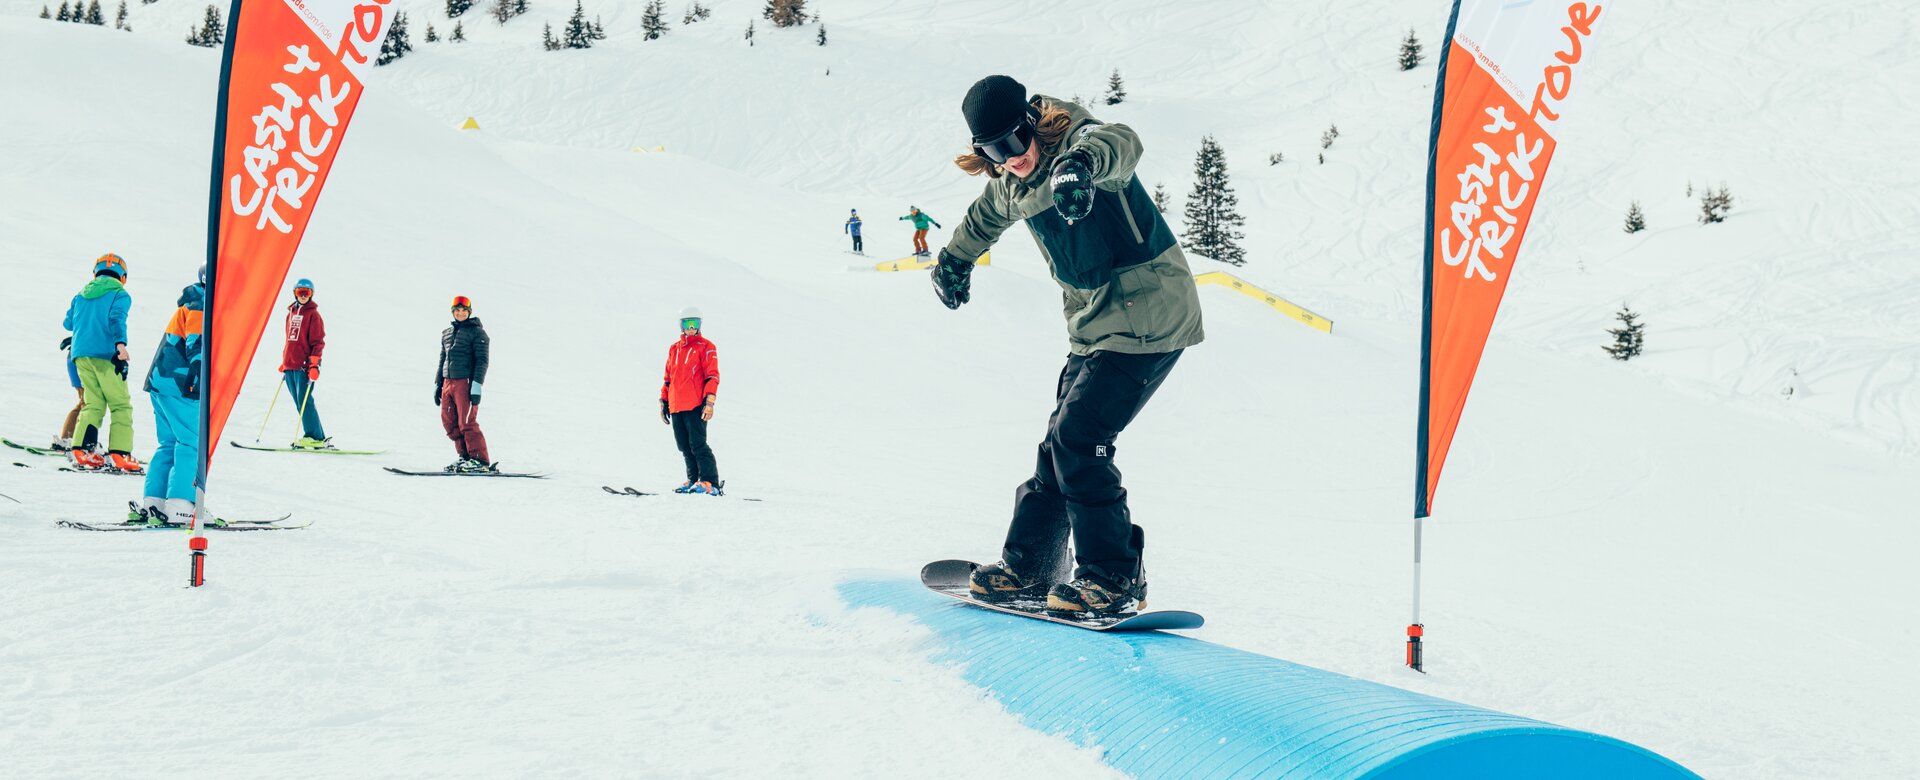 Earn some cash with your freestyle tricks at the Cash4Tricks Tour in Ski amadé